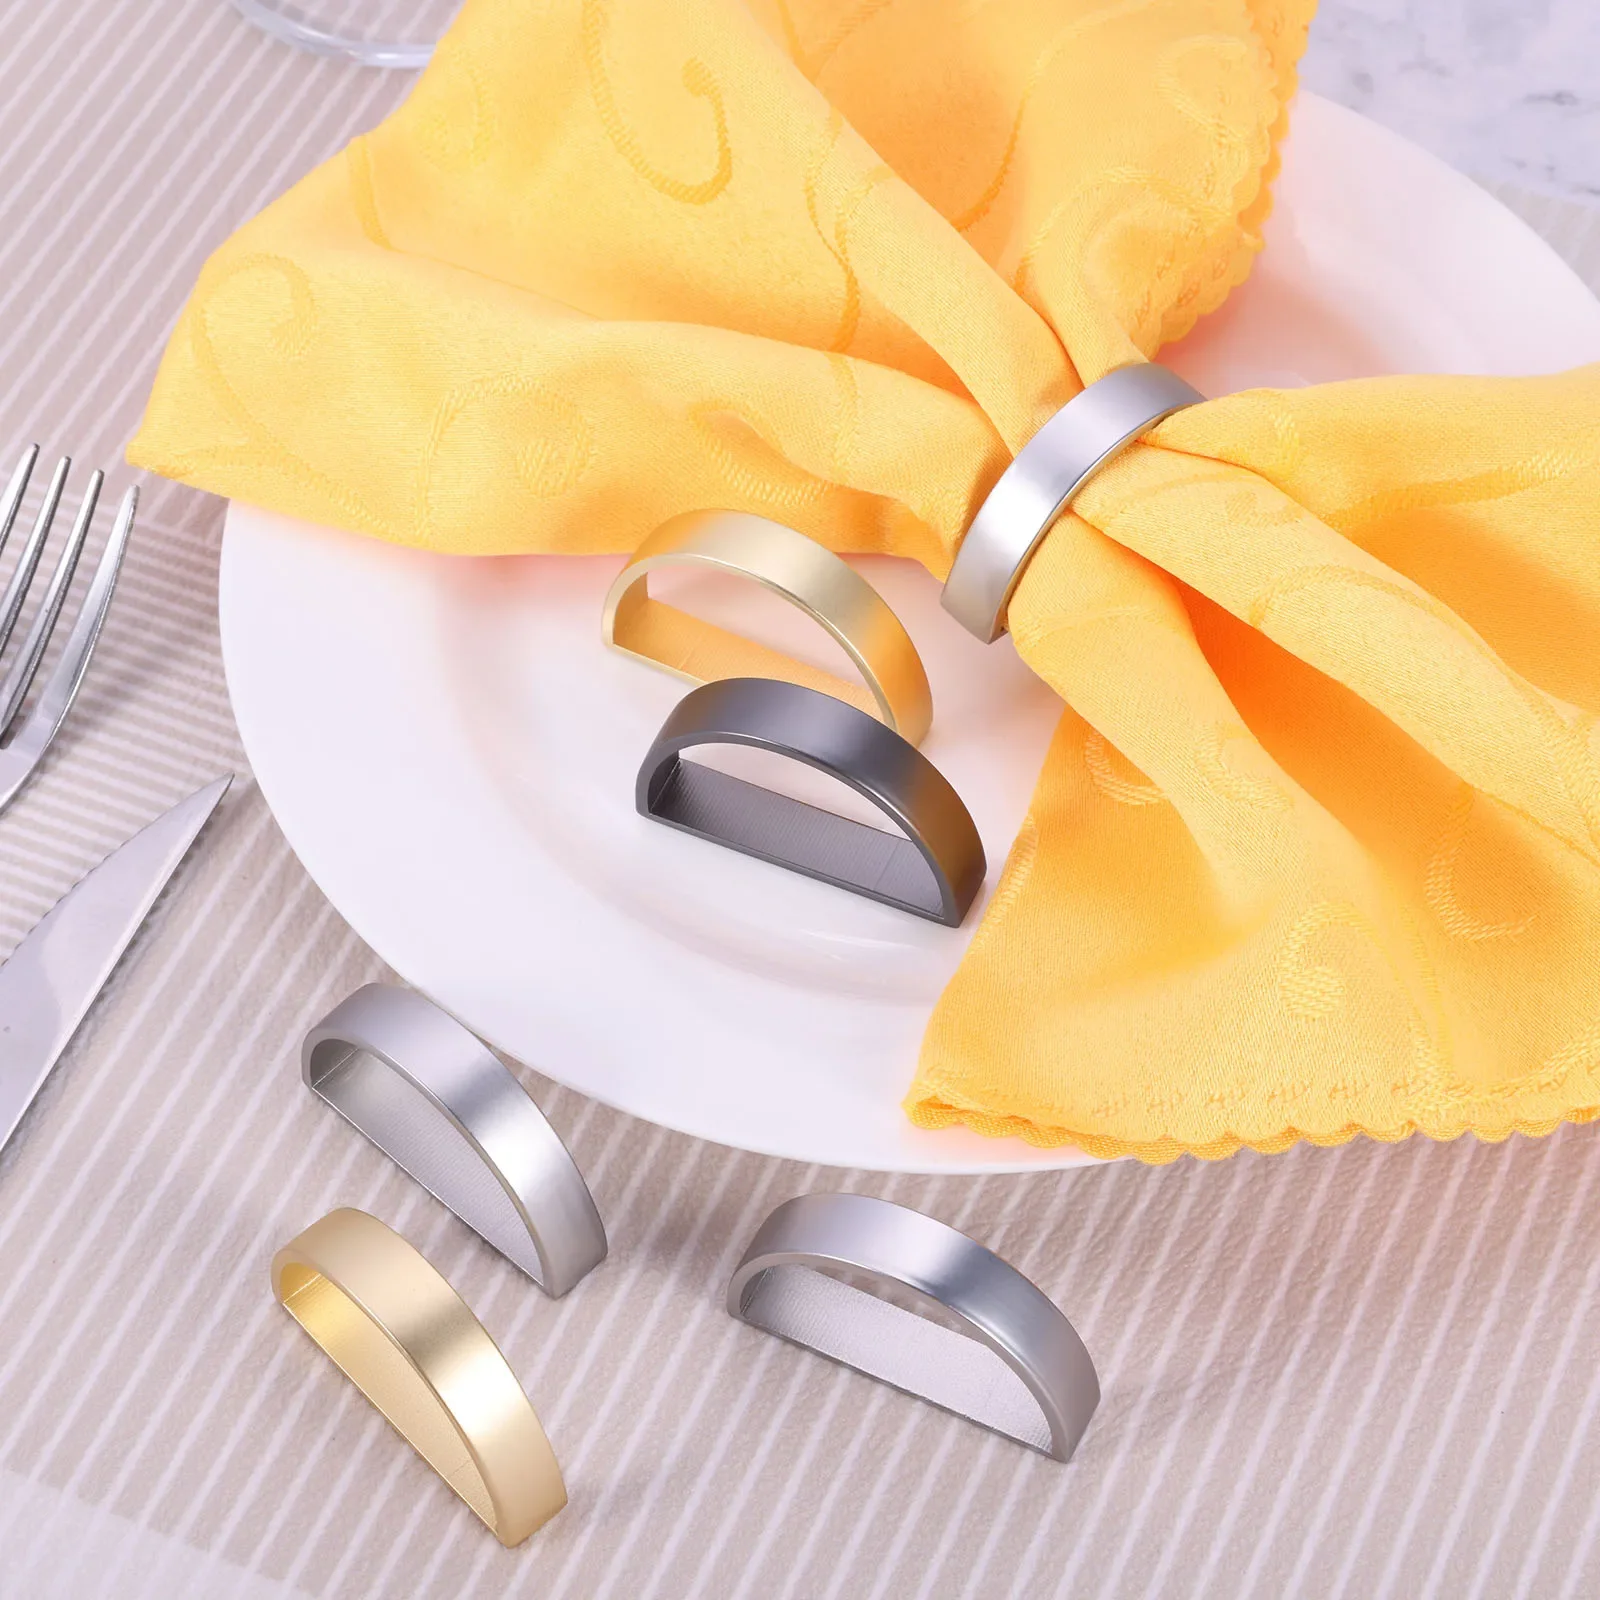 

12pcs D-ring Napkin Holder Table Cloth Metal Buckle 4.7cm Dinner Ornament Wedding Party Holiday Banquet Decor Gold Silver Black